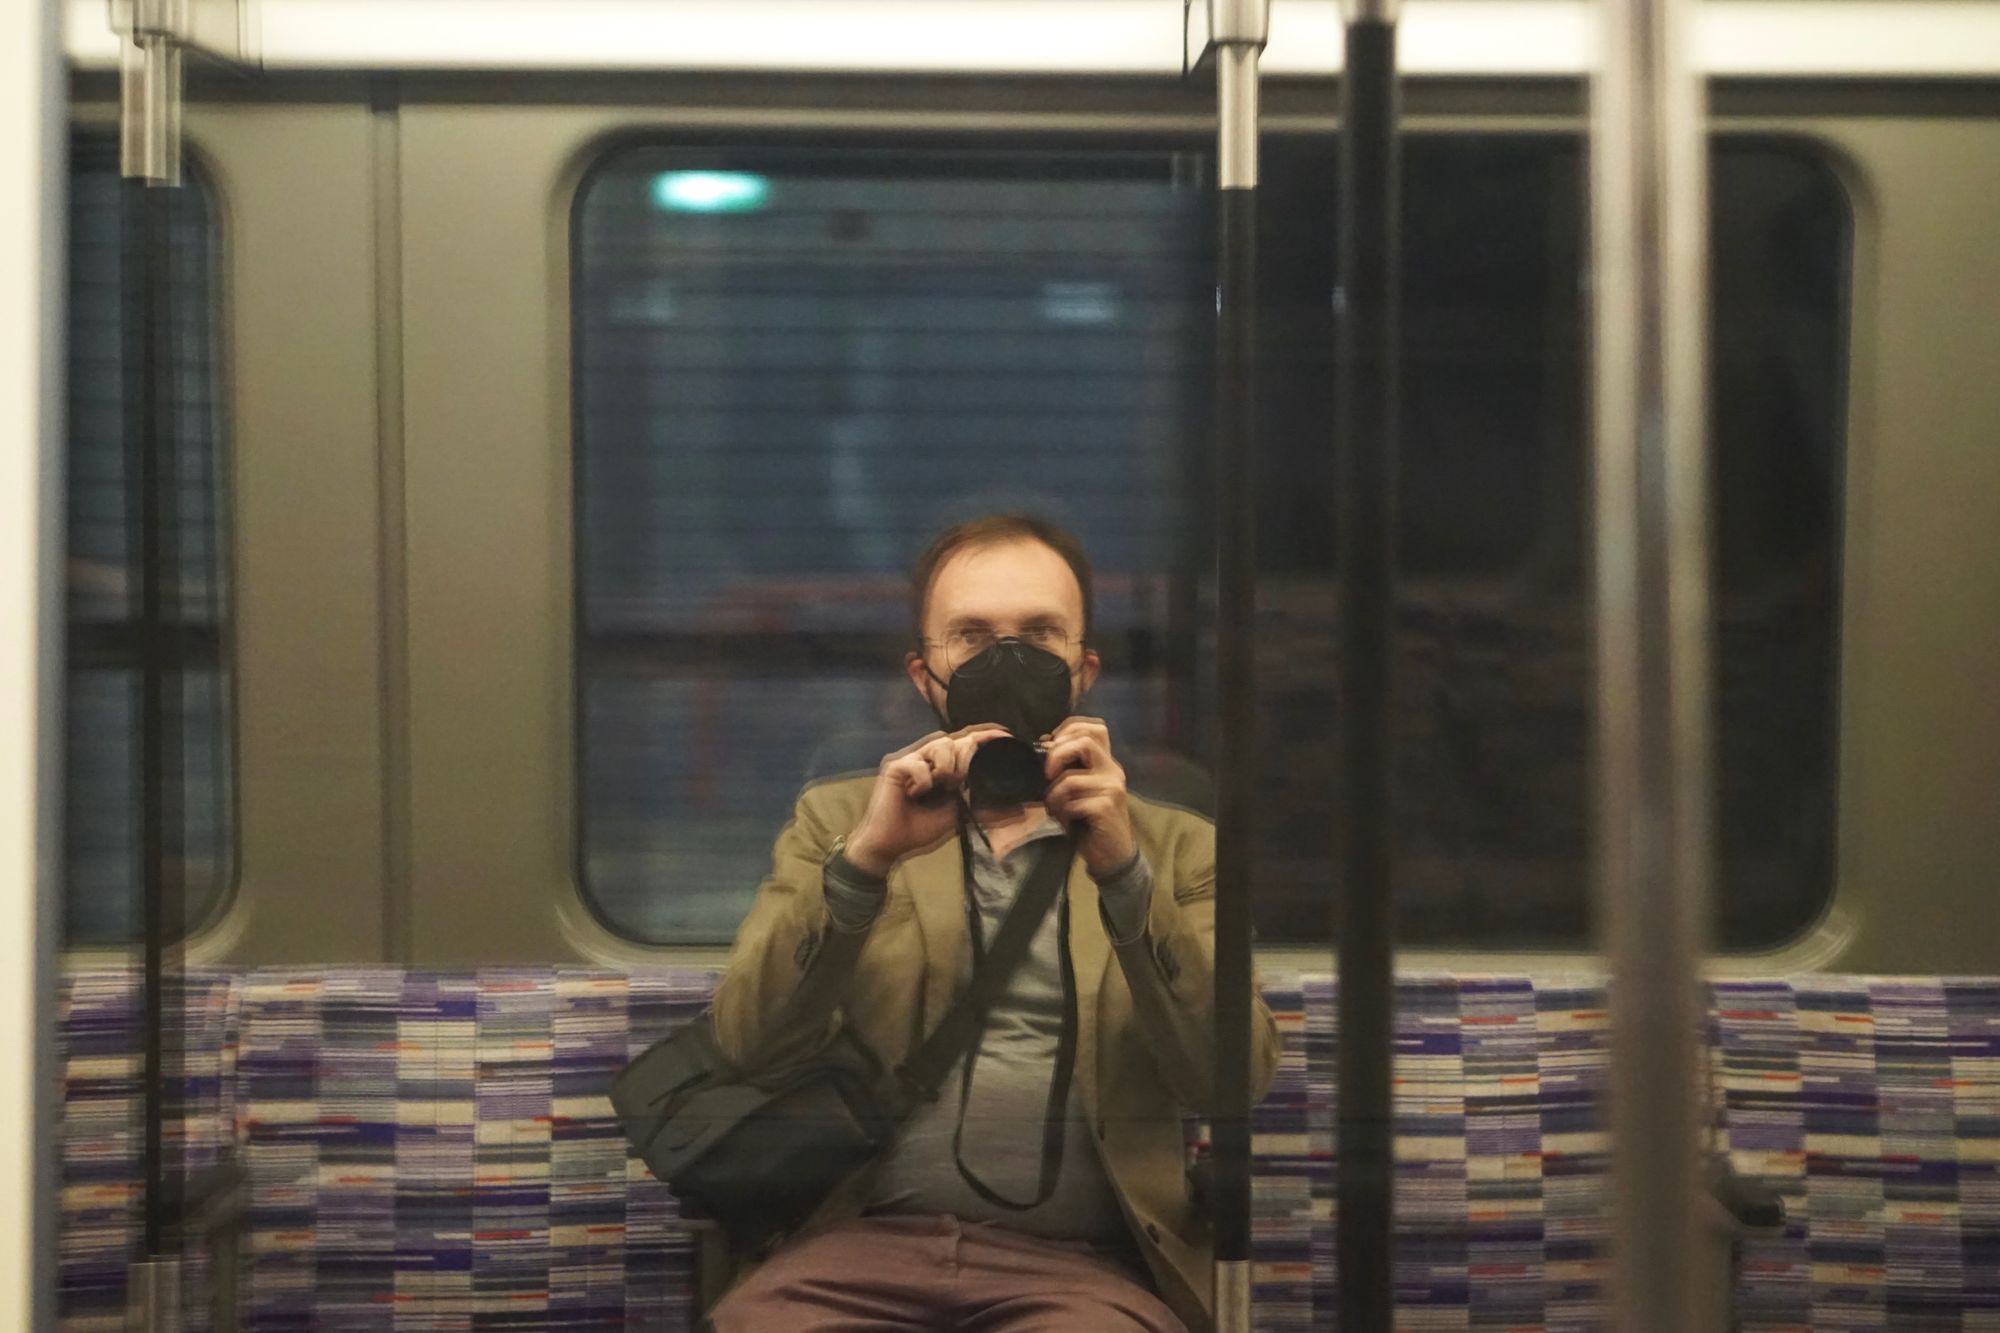 Jonathan taking a photo of his own reflection in the train window, wearing a mask and a cream coloured blazer.